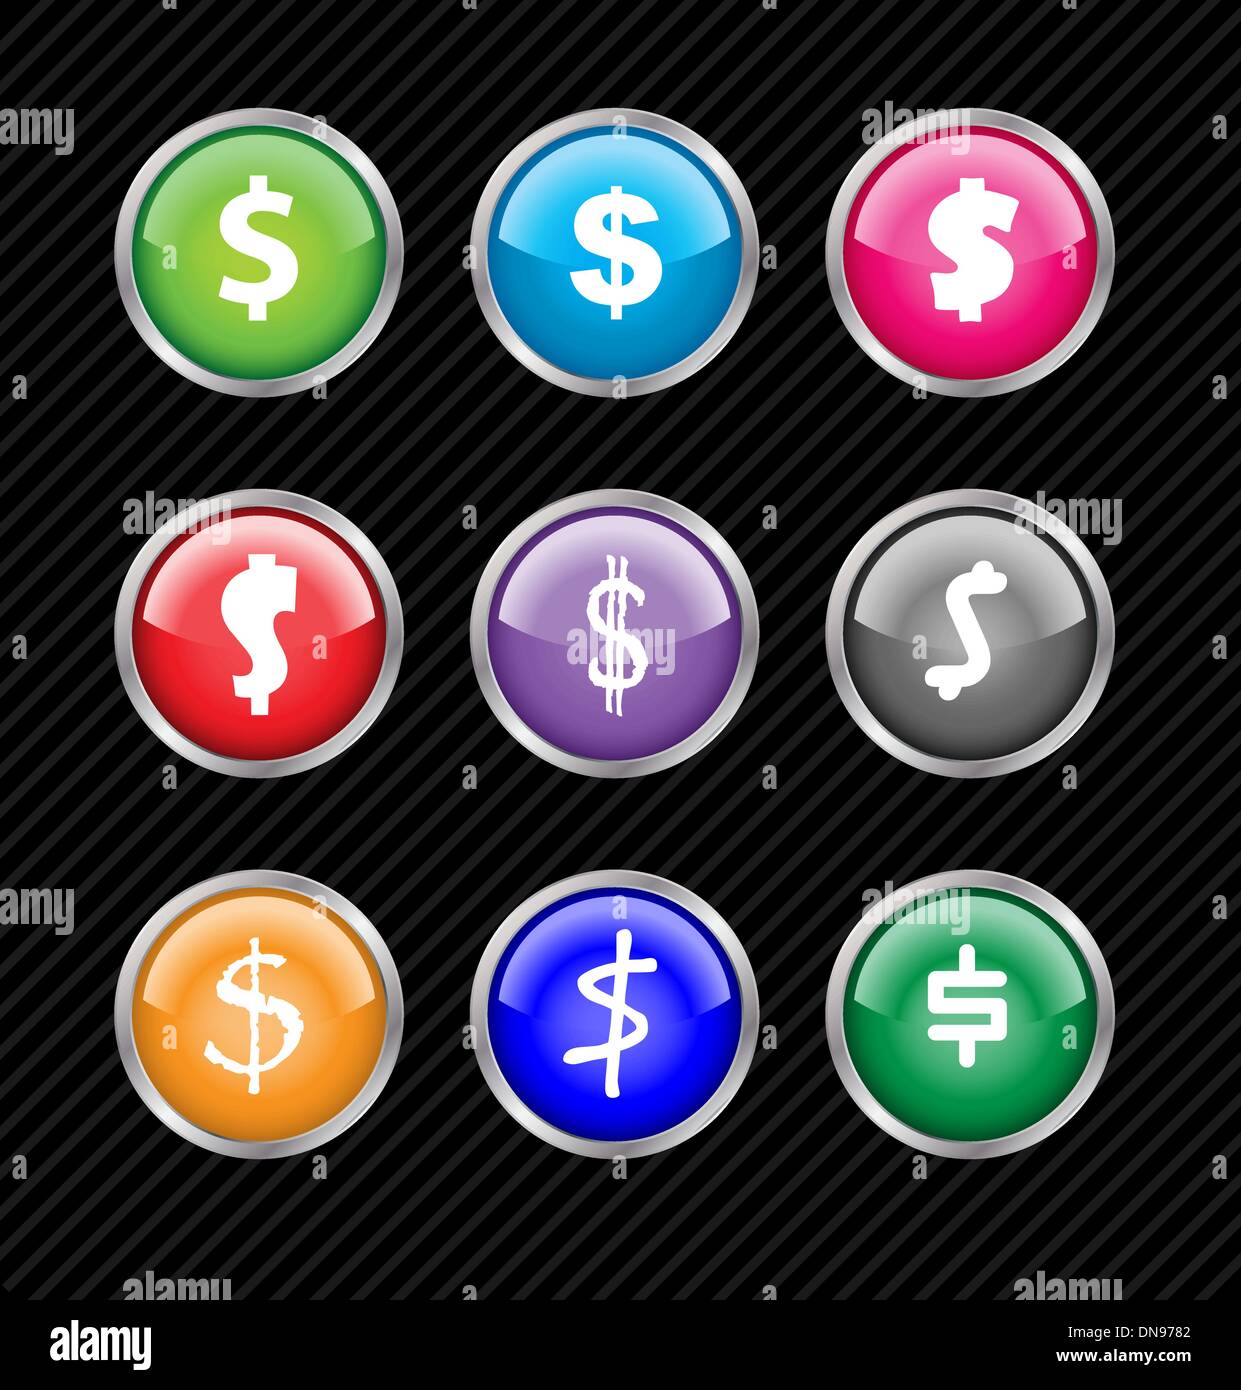 Set of vector buttons with different variations of dollar sign s Stock Vector